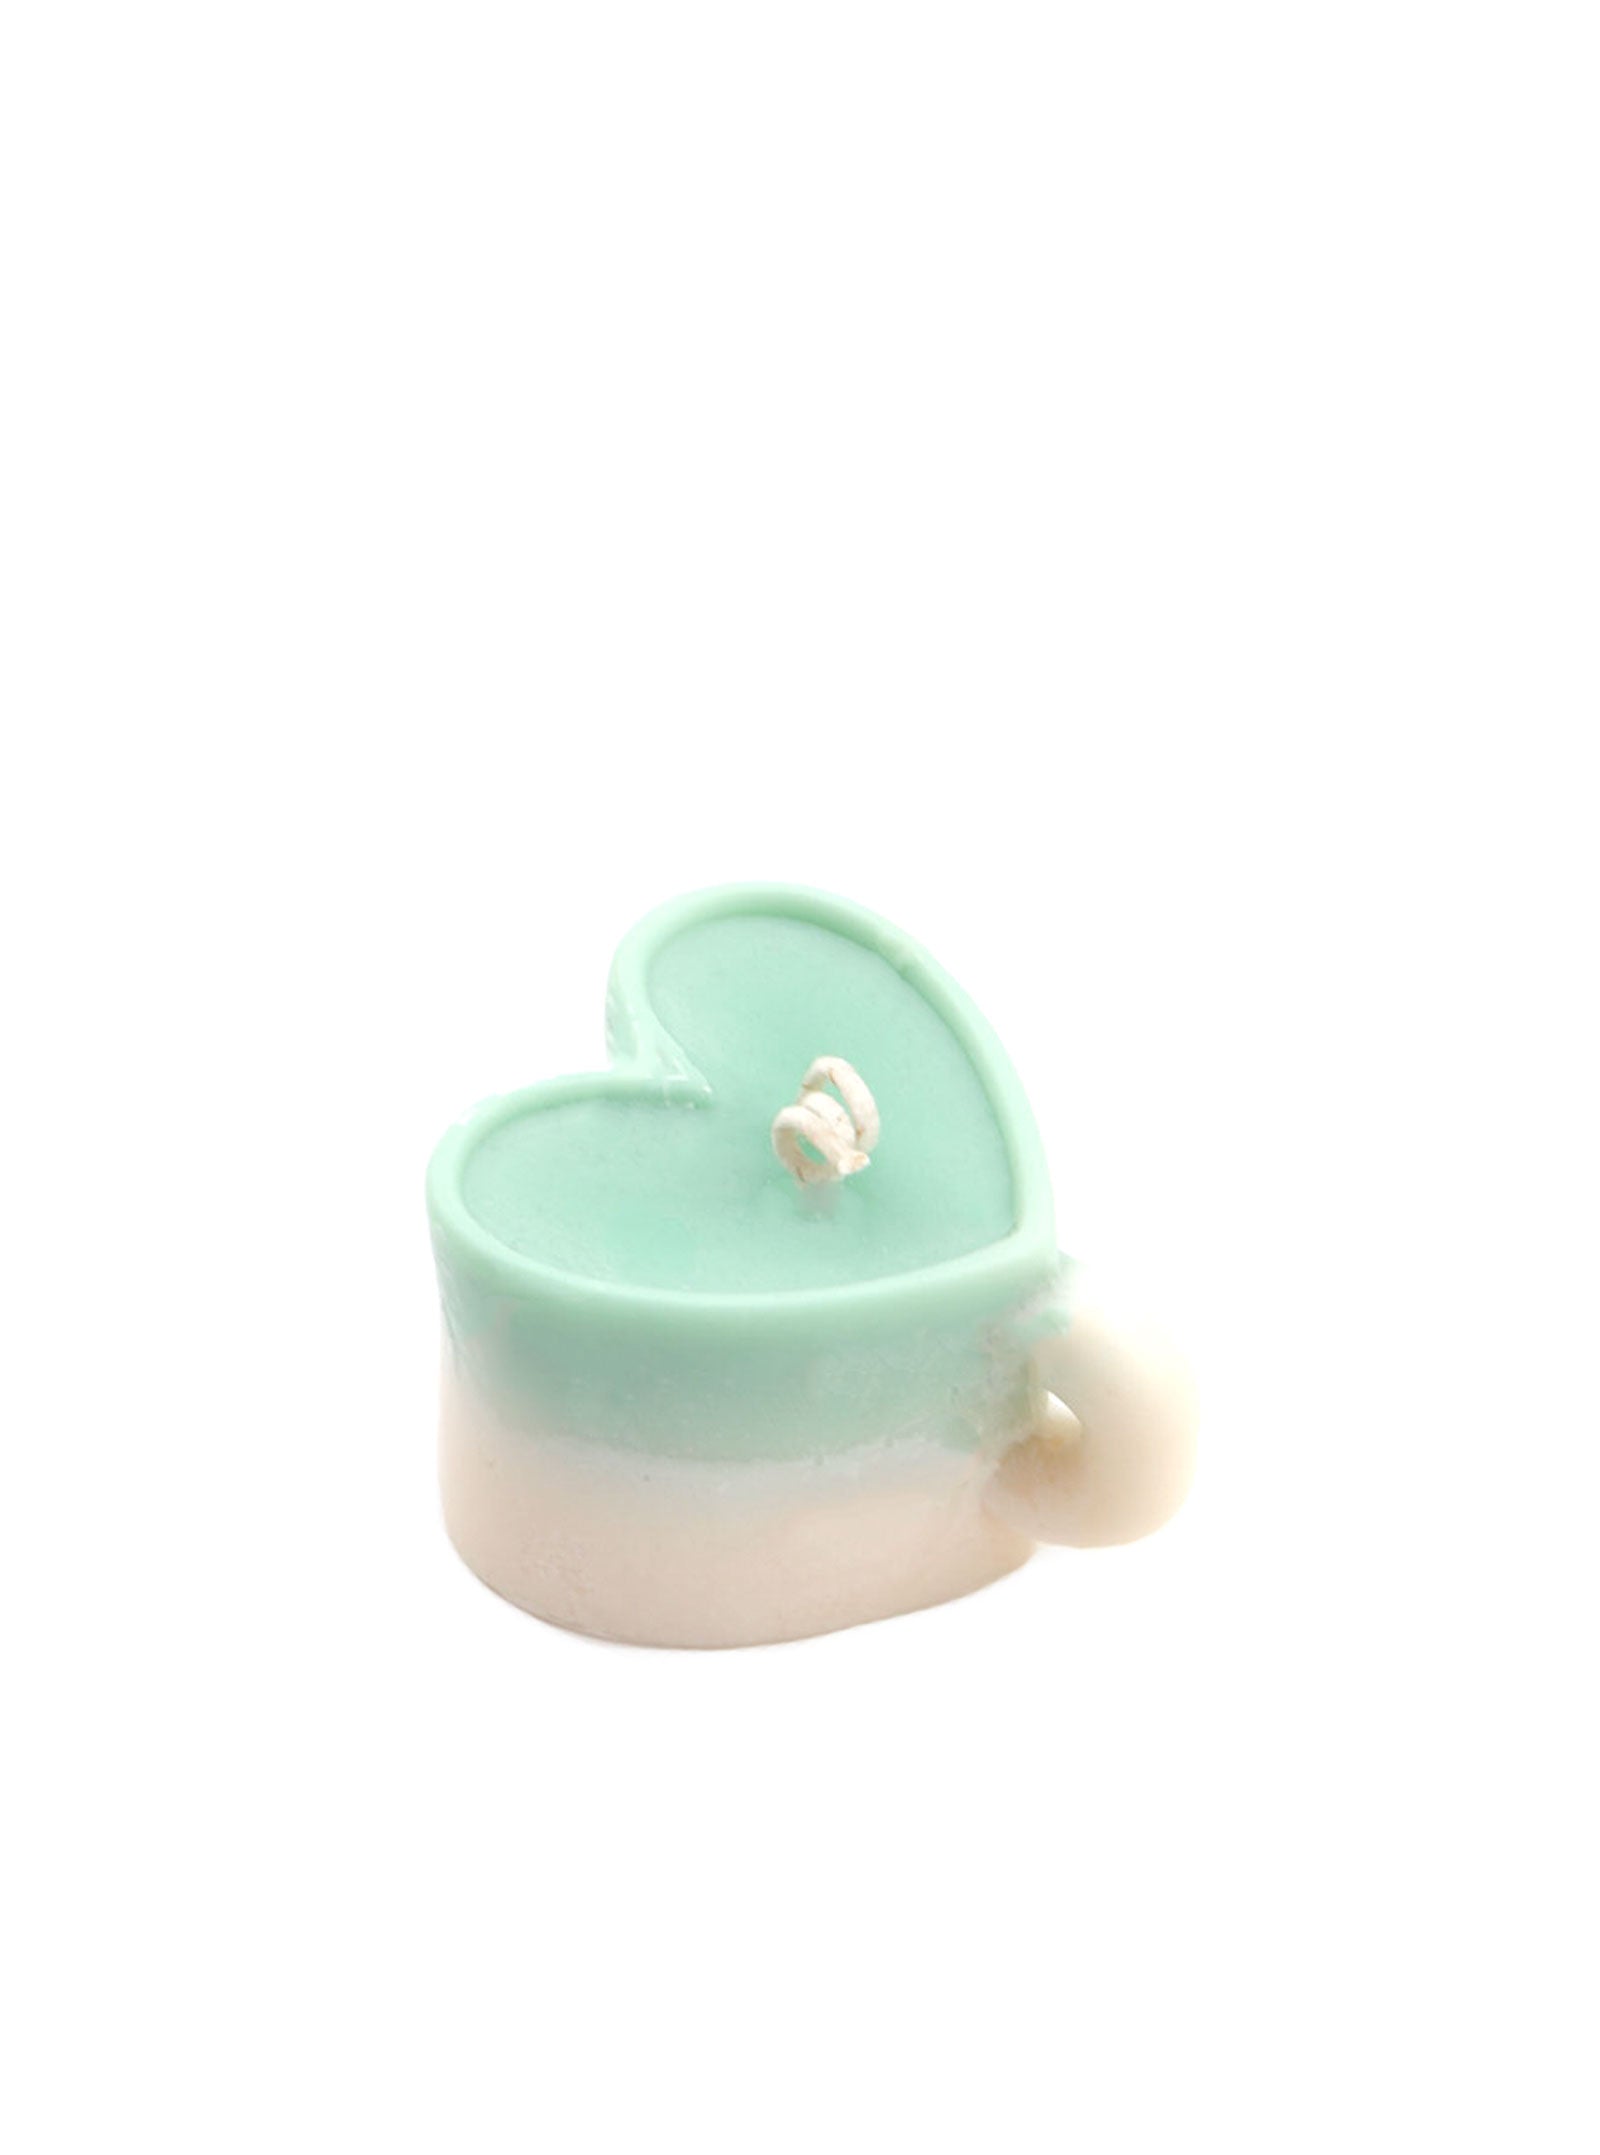 HEART SHAPED TEA CUP SOY WAX CANDLE